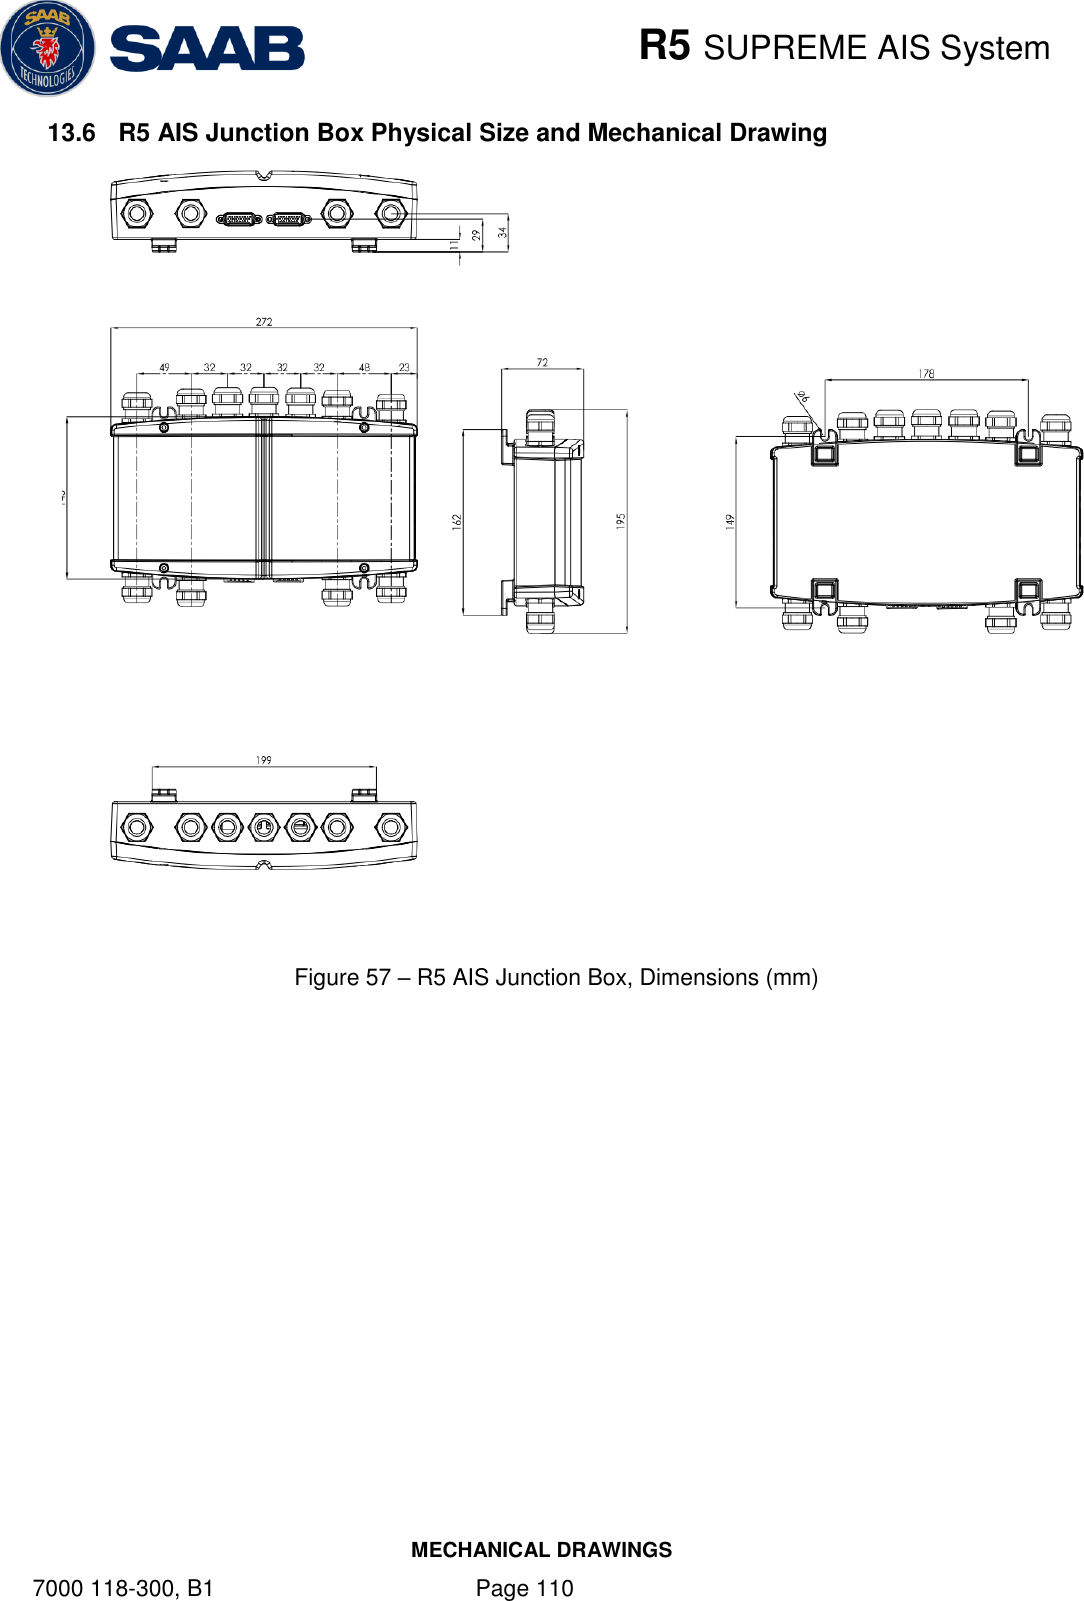    R5 SUPREME AIS System MECHANICAL DRAWINGS 7000 118-300, B1    Page 110 13.6  R5 AIS Junction Box Physical Size and Mechanical Drawing    Figure 57 – R5 AIS Junction Box, Dimensions (mm)   